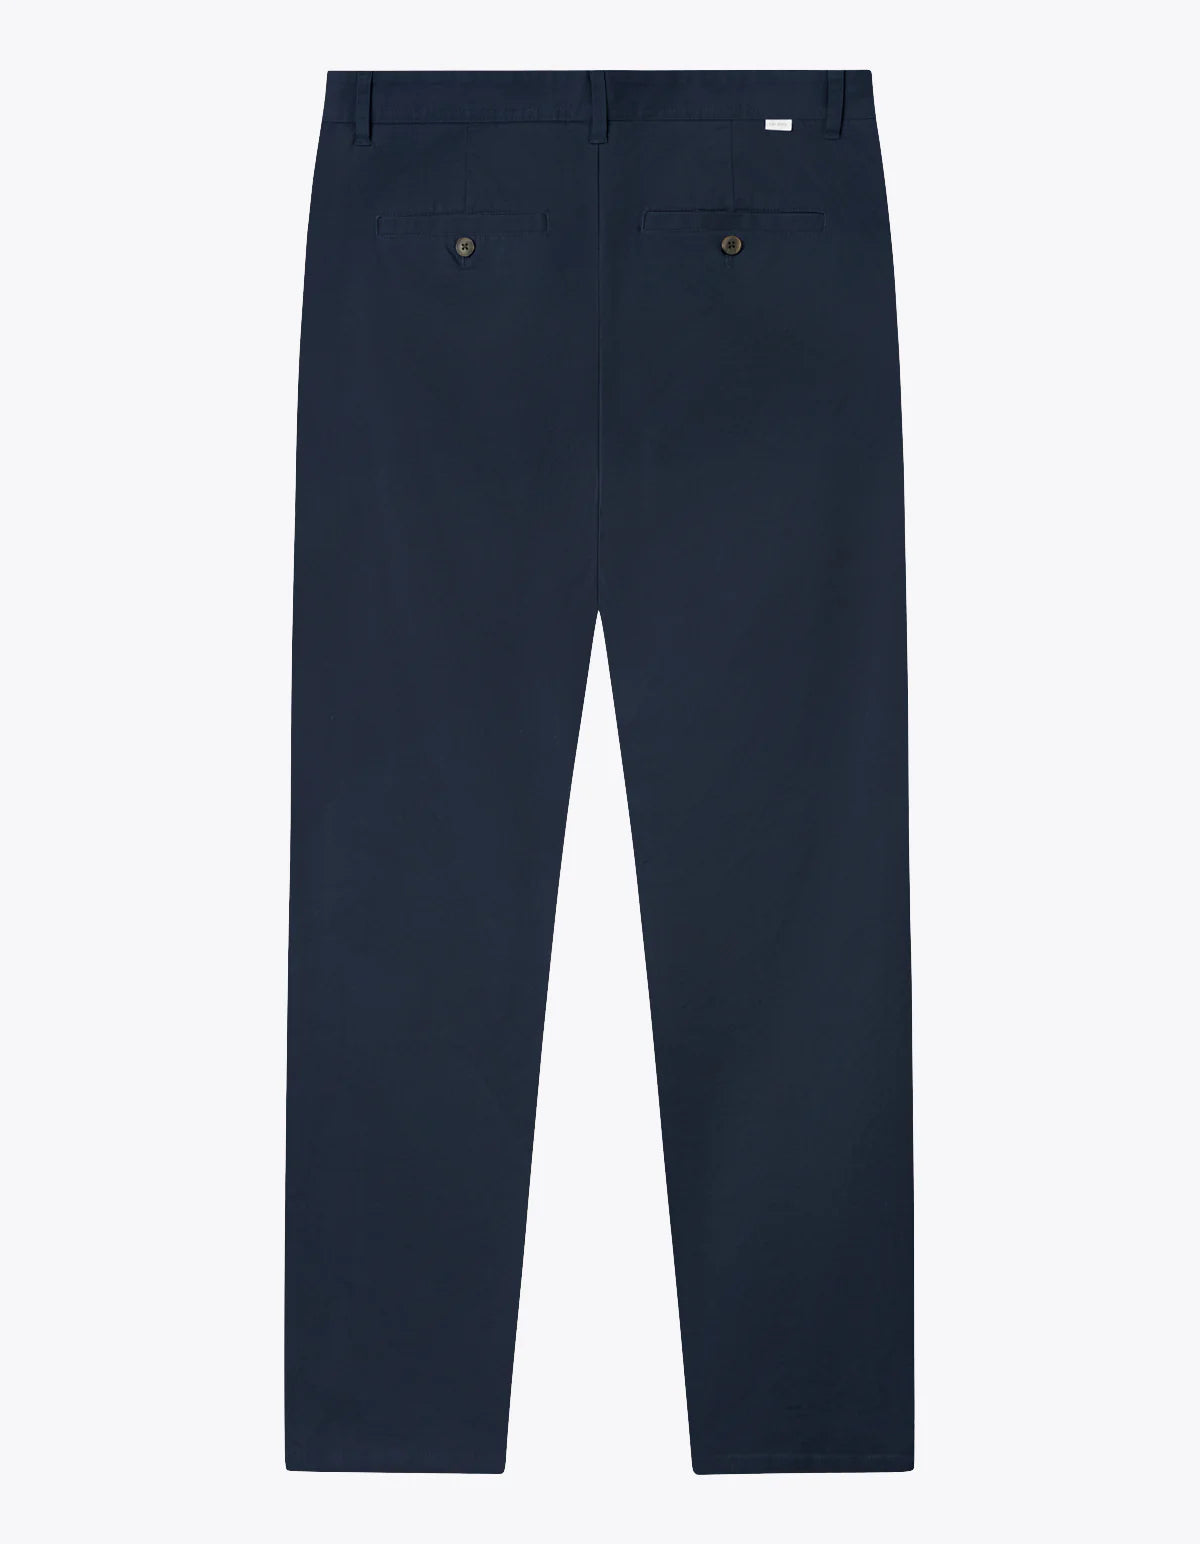 PANTALONES PARKER TWILL - ARENA OSCURO